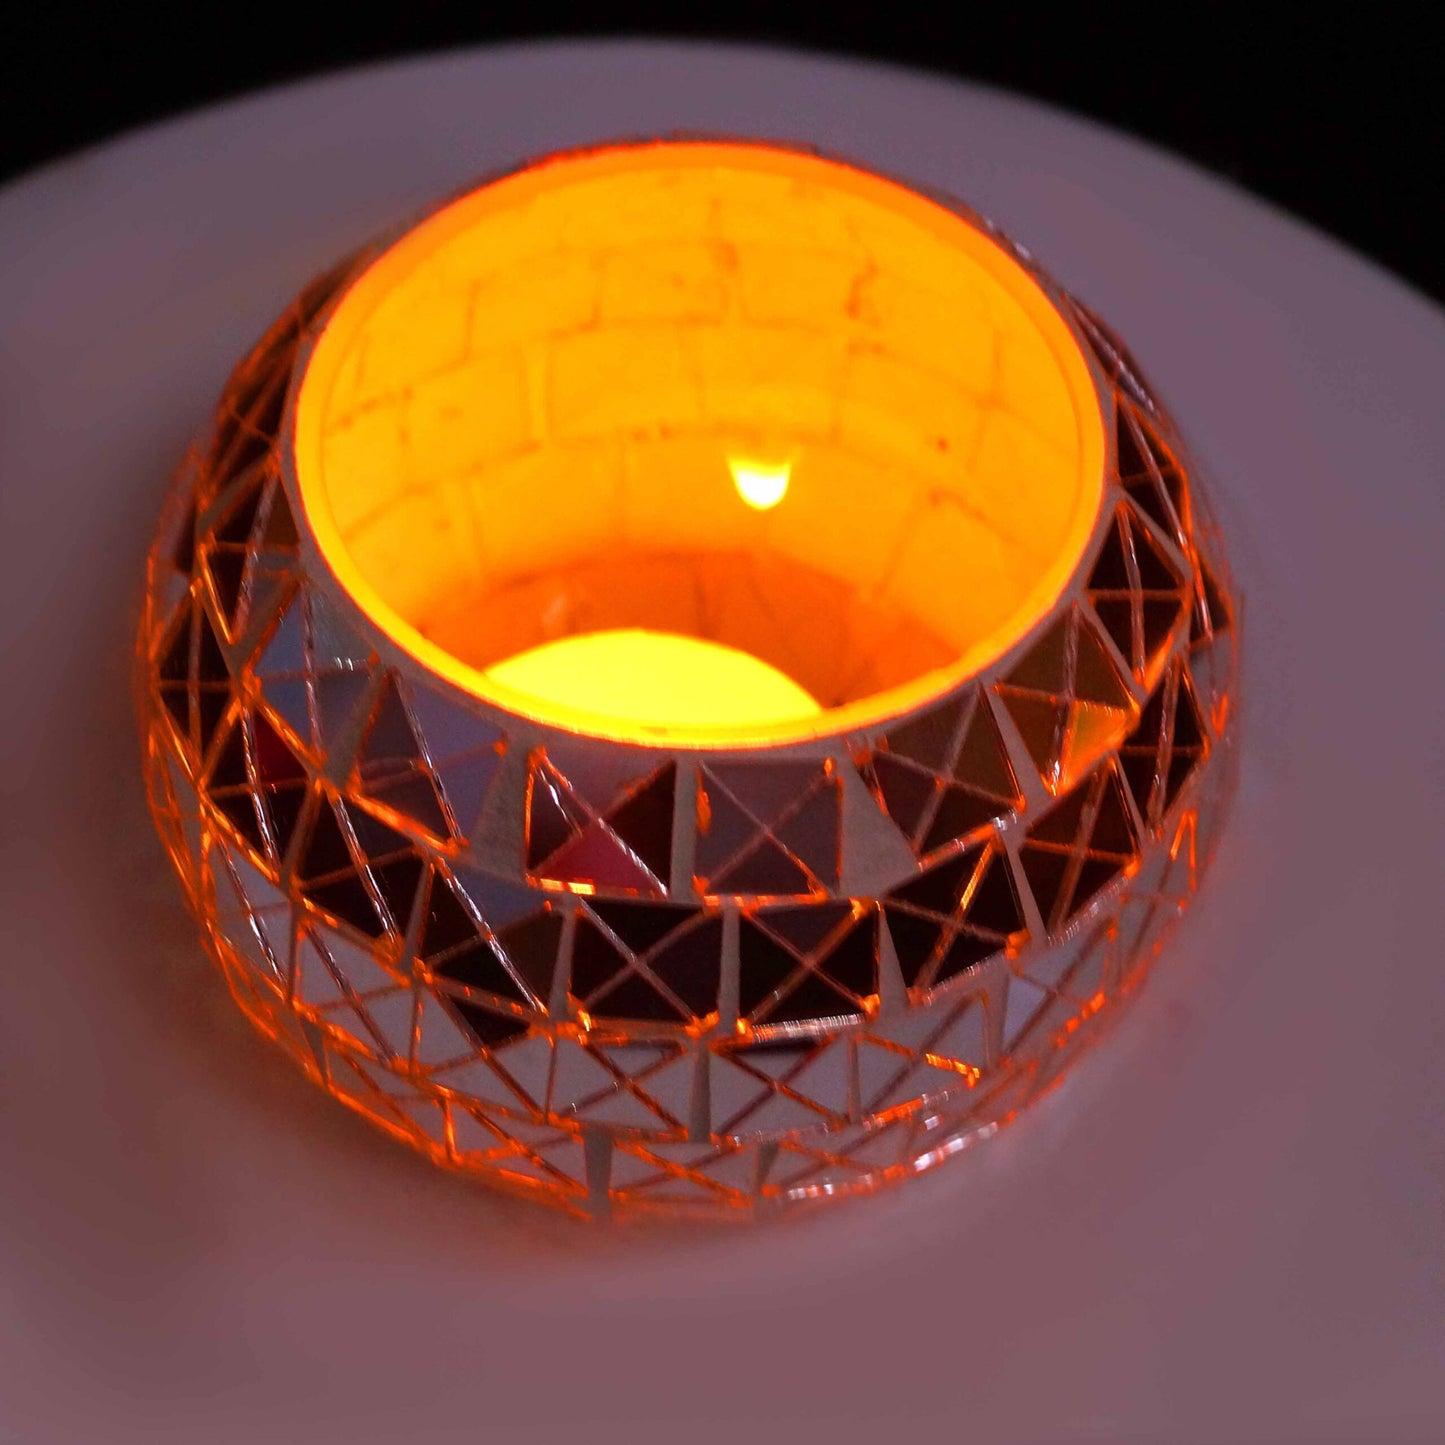 Glass Tealight Candle Holders/ Pack of 2- Mirror Mosaic Glass T-lite Votive with 2 Tea Light Candle